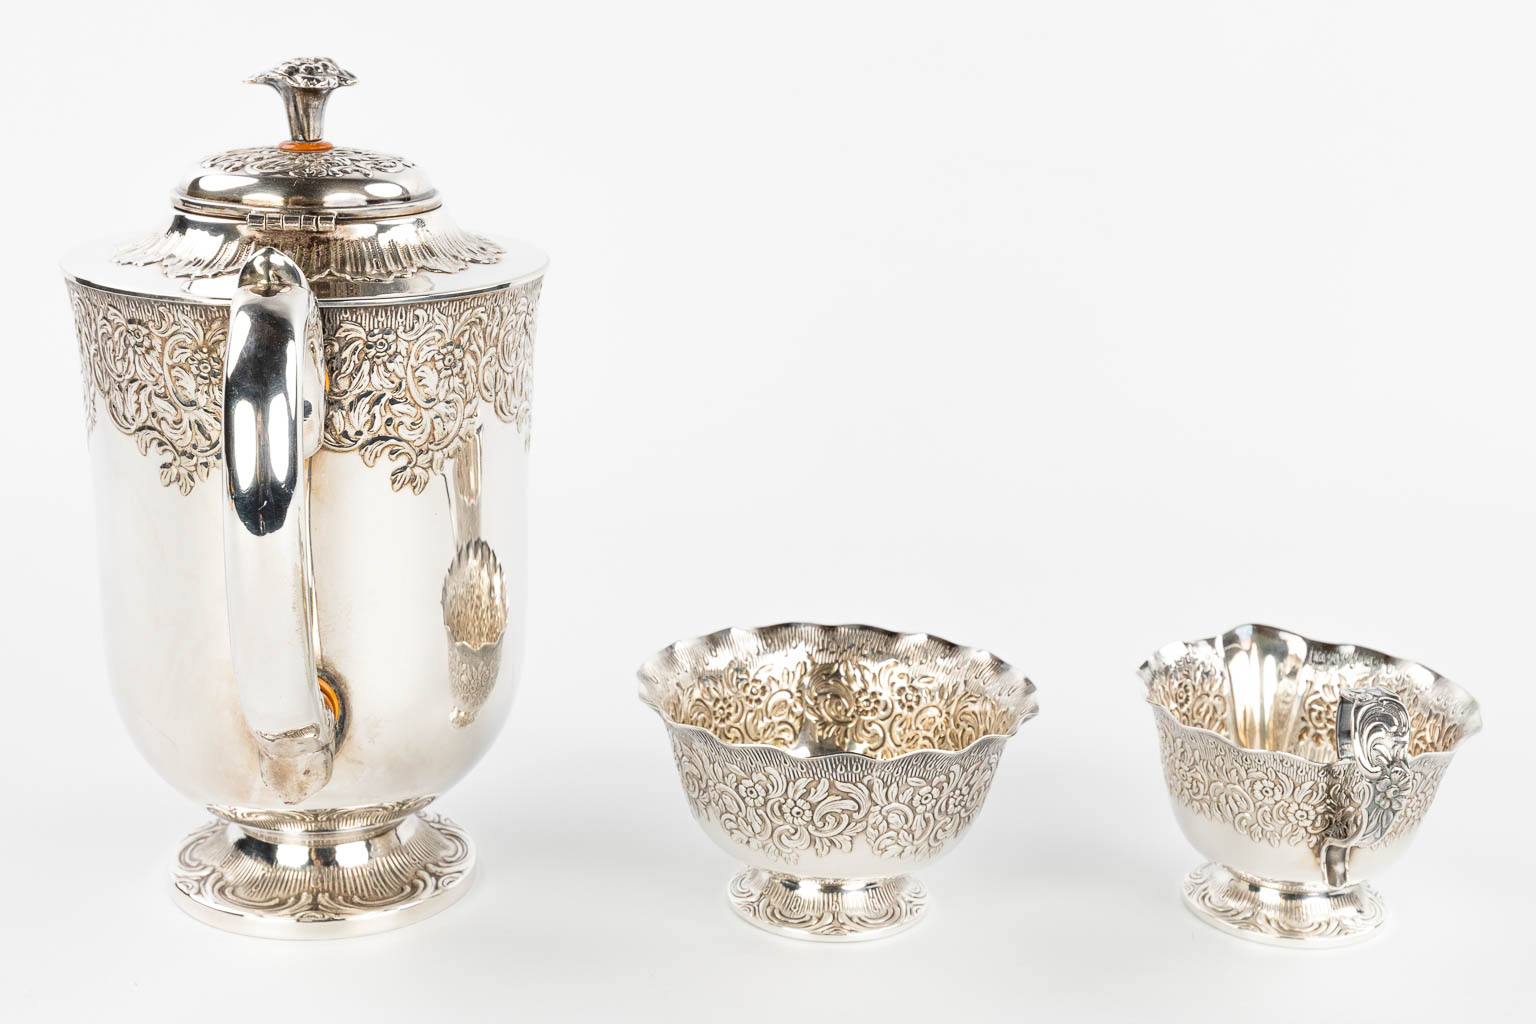 A silver-plated coffee service on a platter with sugar pot, coffee pot and milk jug. (H:22cm)